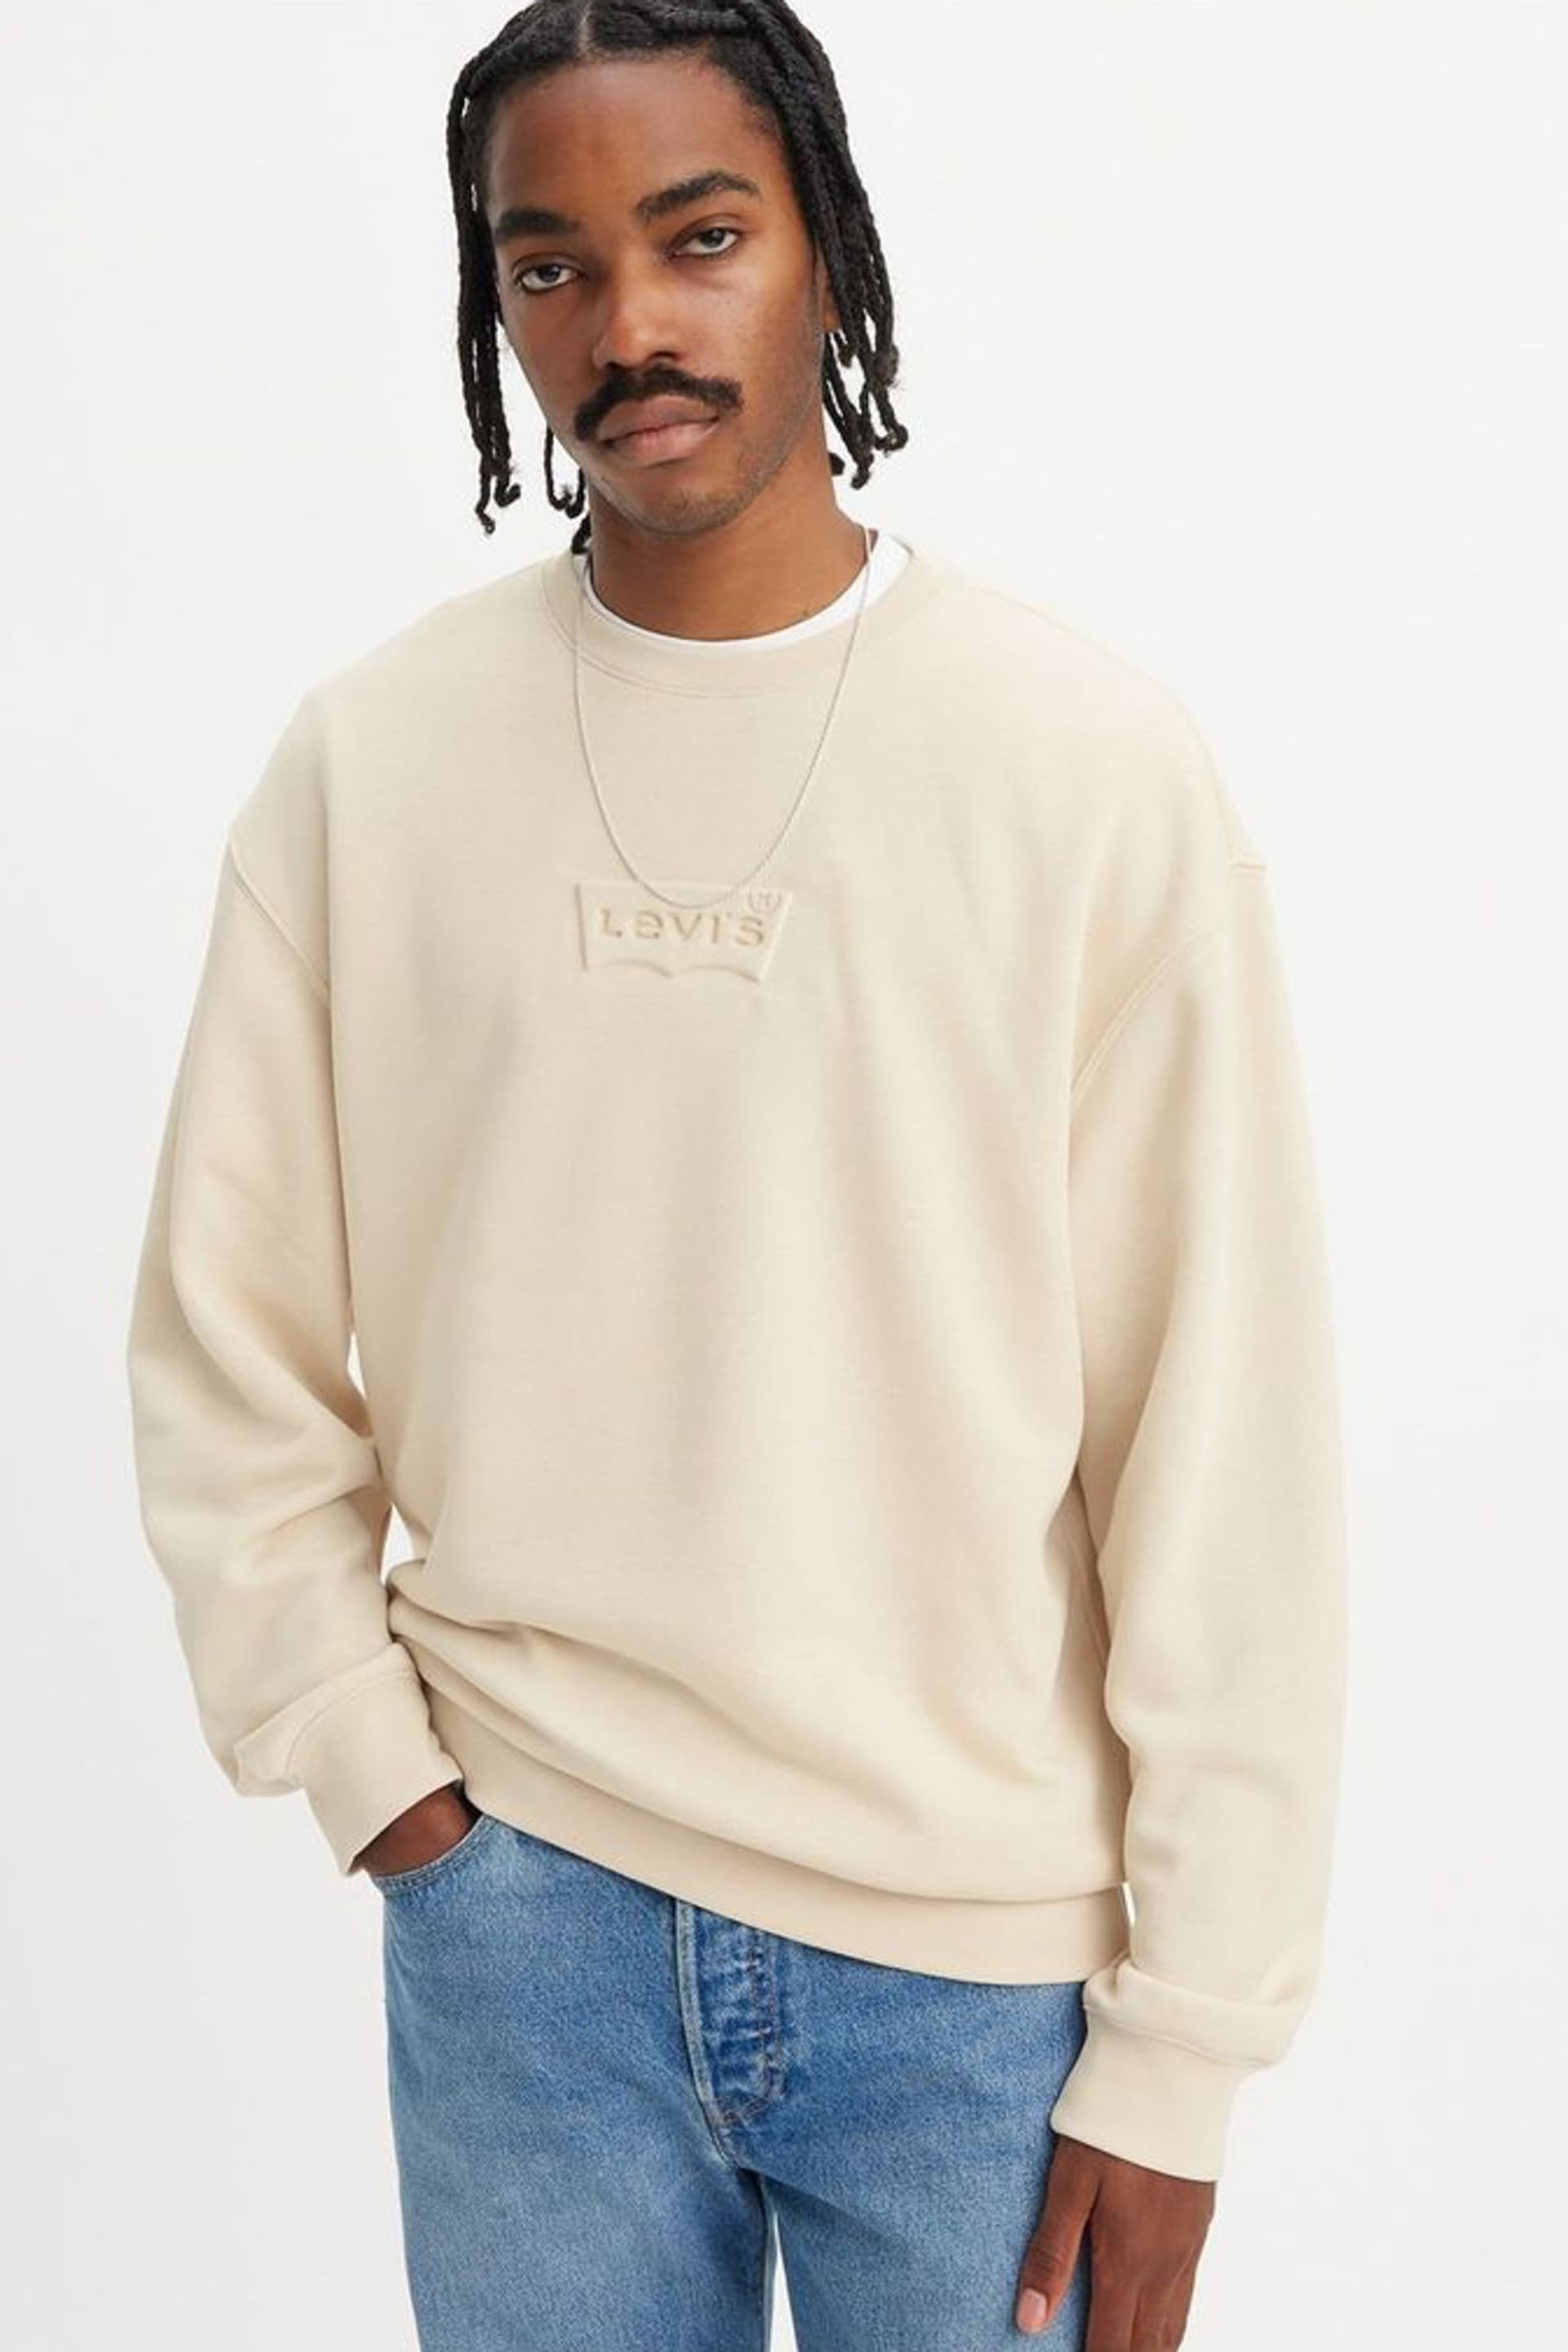 Levi's® Nude Relaxed Fit Graphic Crewneck Sweatshirt - Image 1 of 6